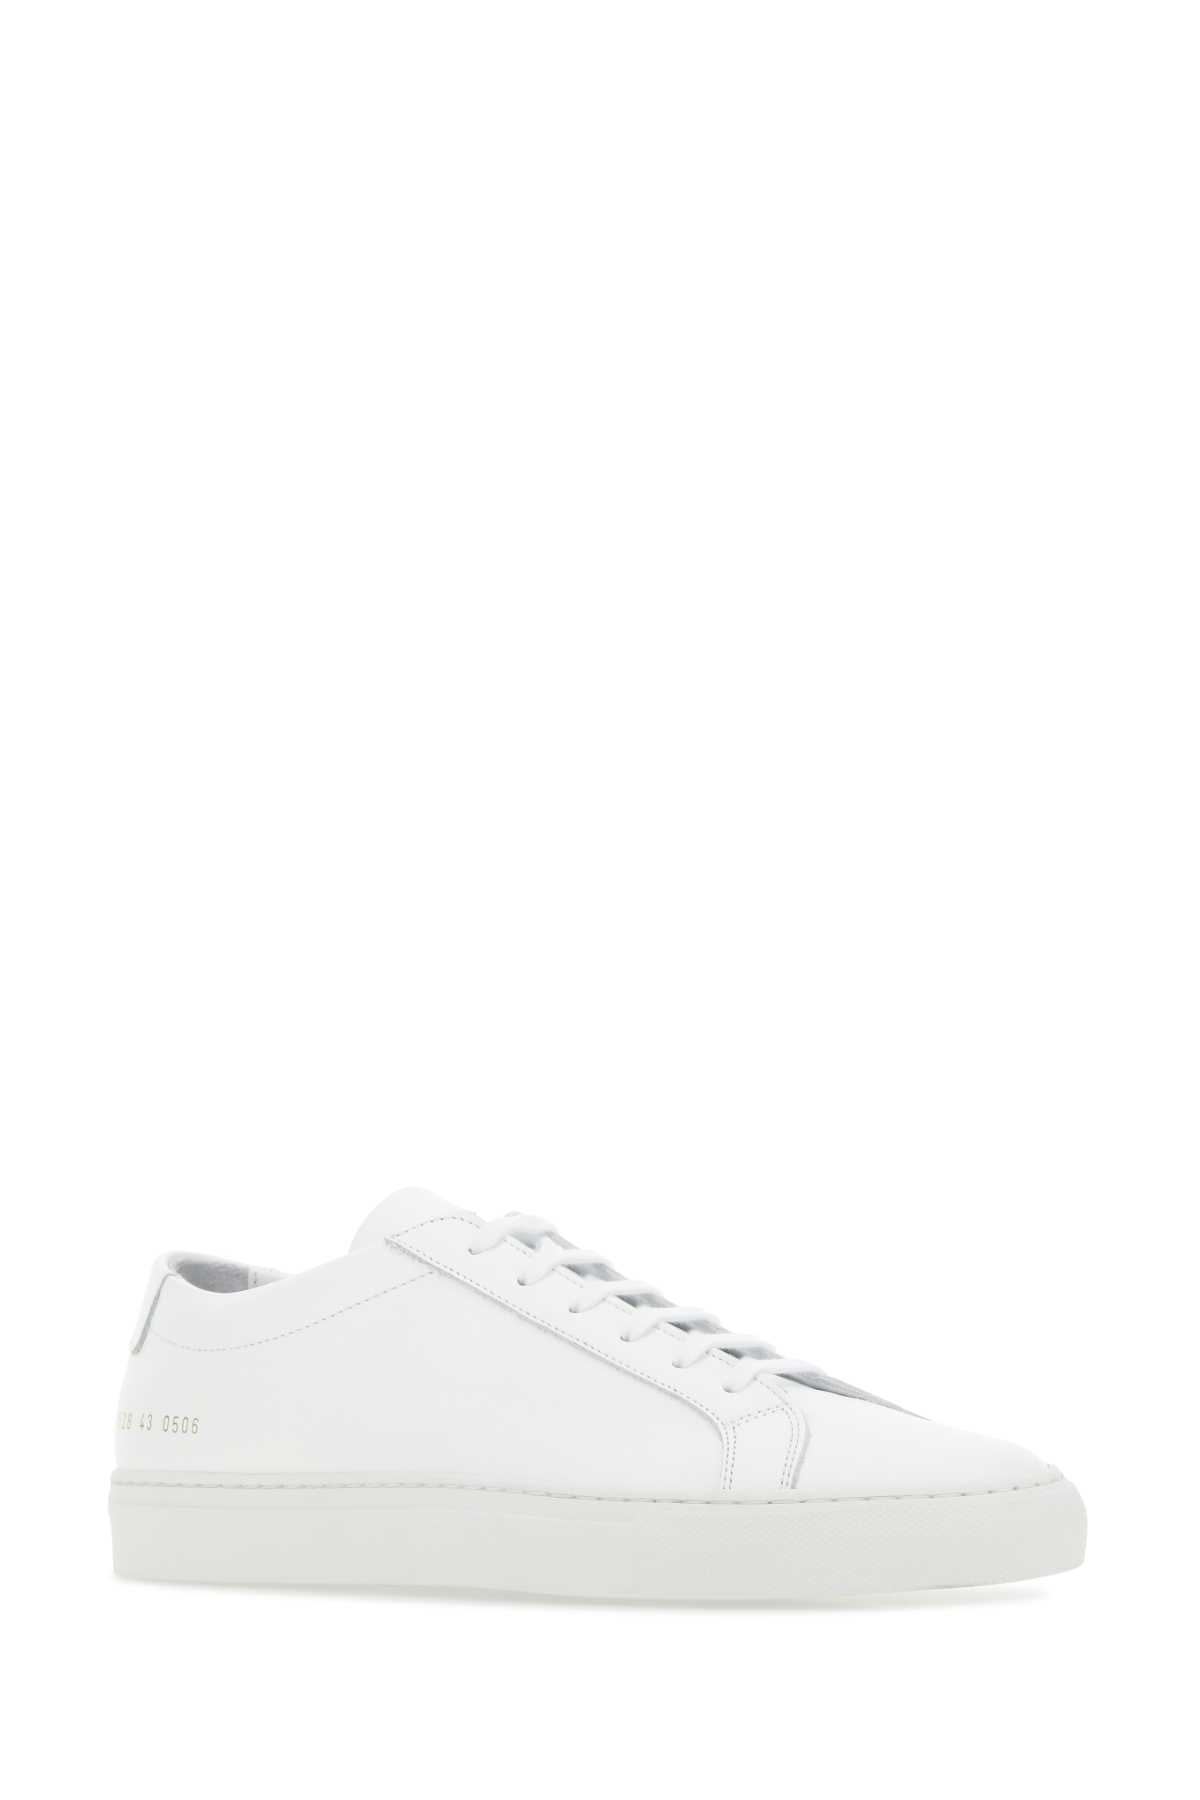 Shop Common Projects White Leather Achilles Sneakers In 0506